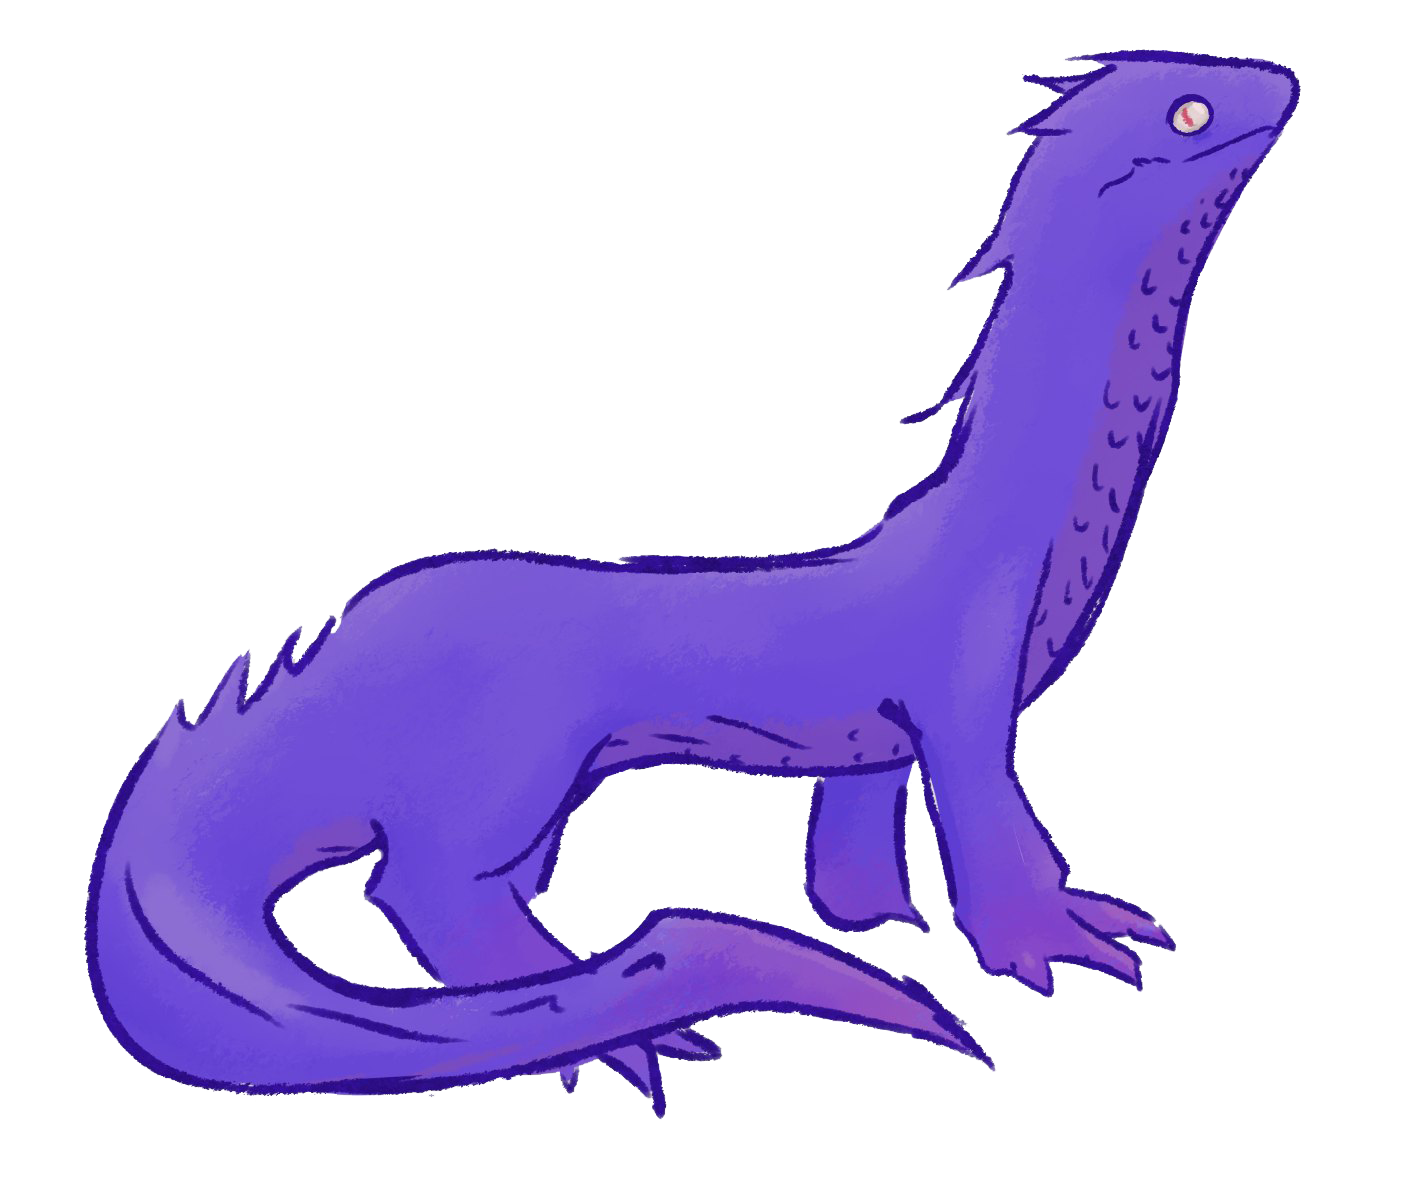 Download PNG image - Purple Lizard PNG Background Image 